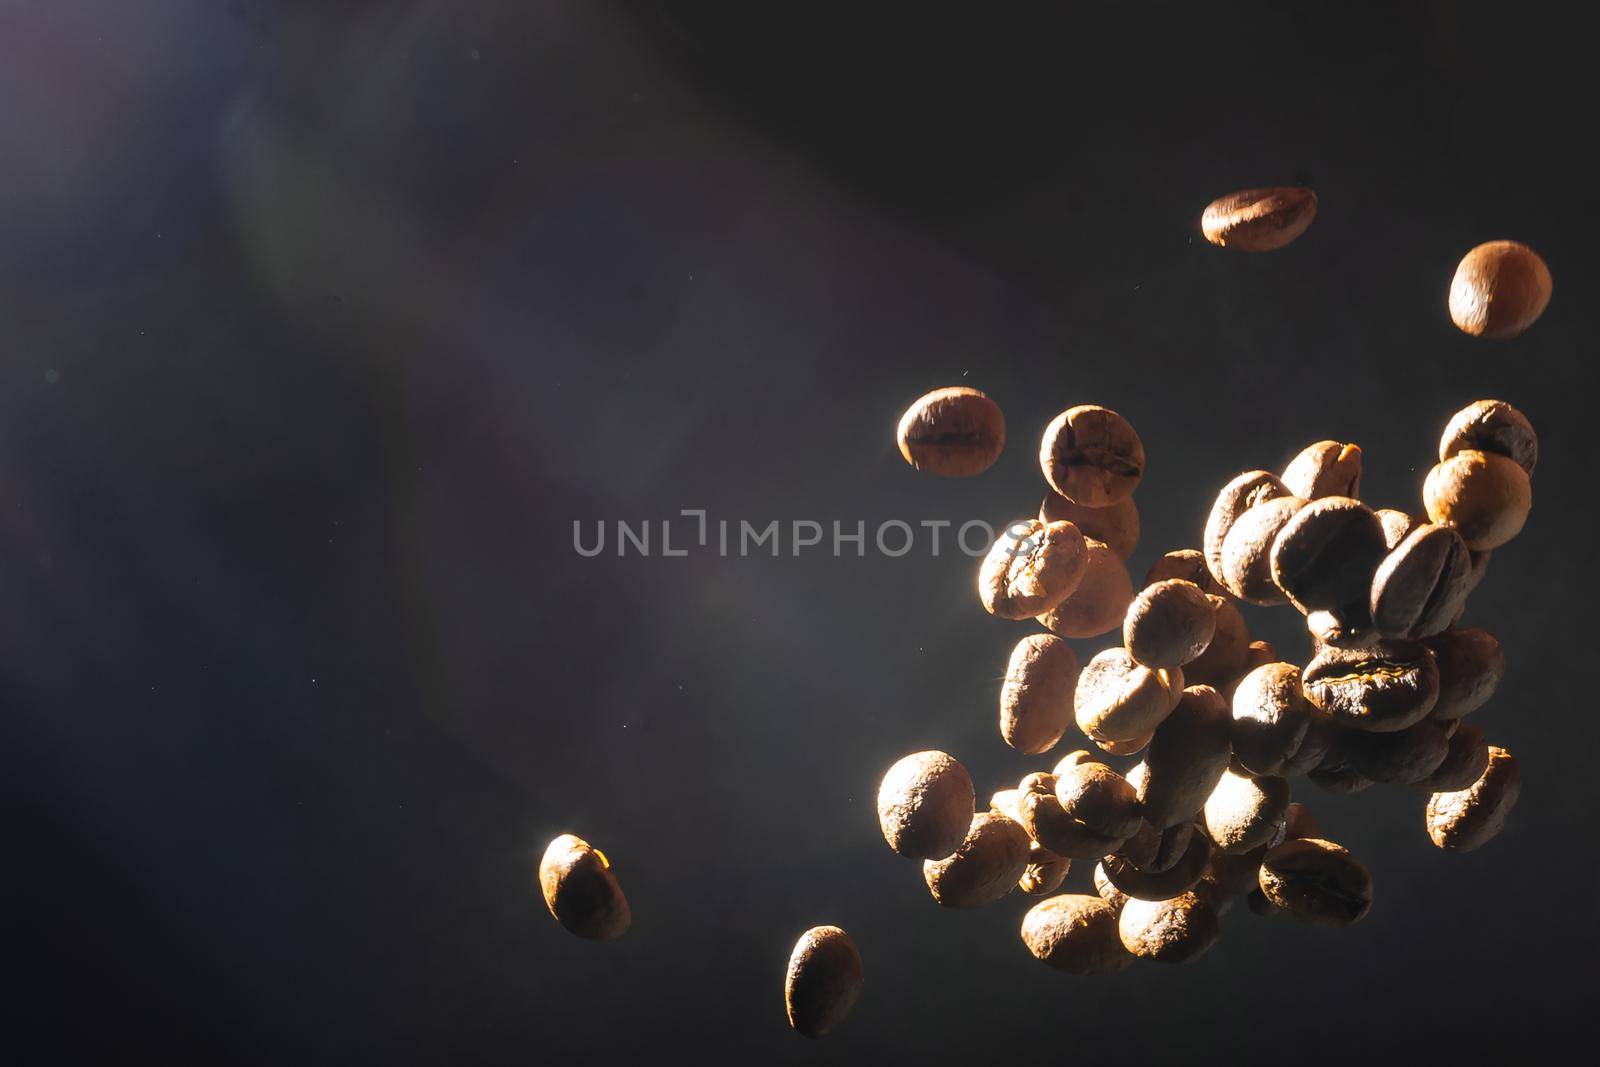 many flying coffee beans on black background.